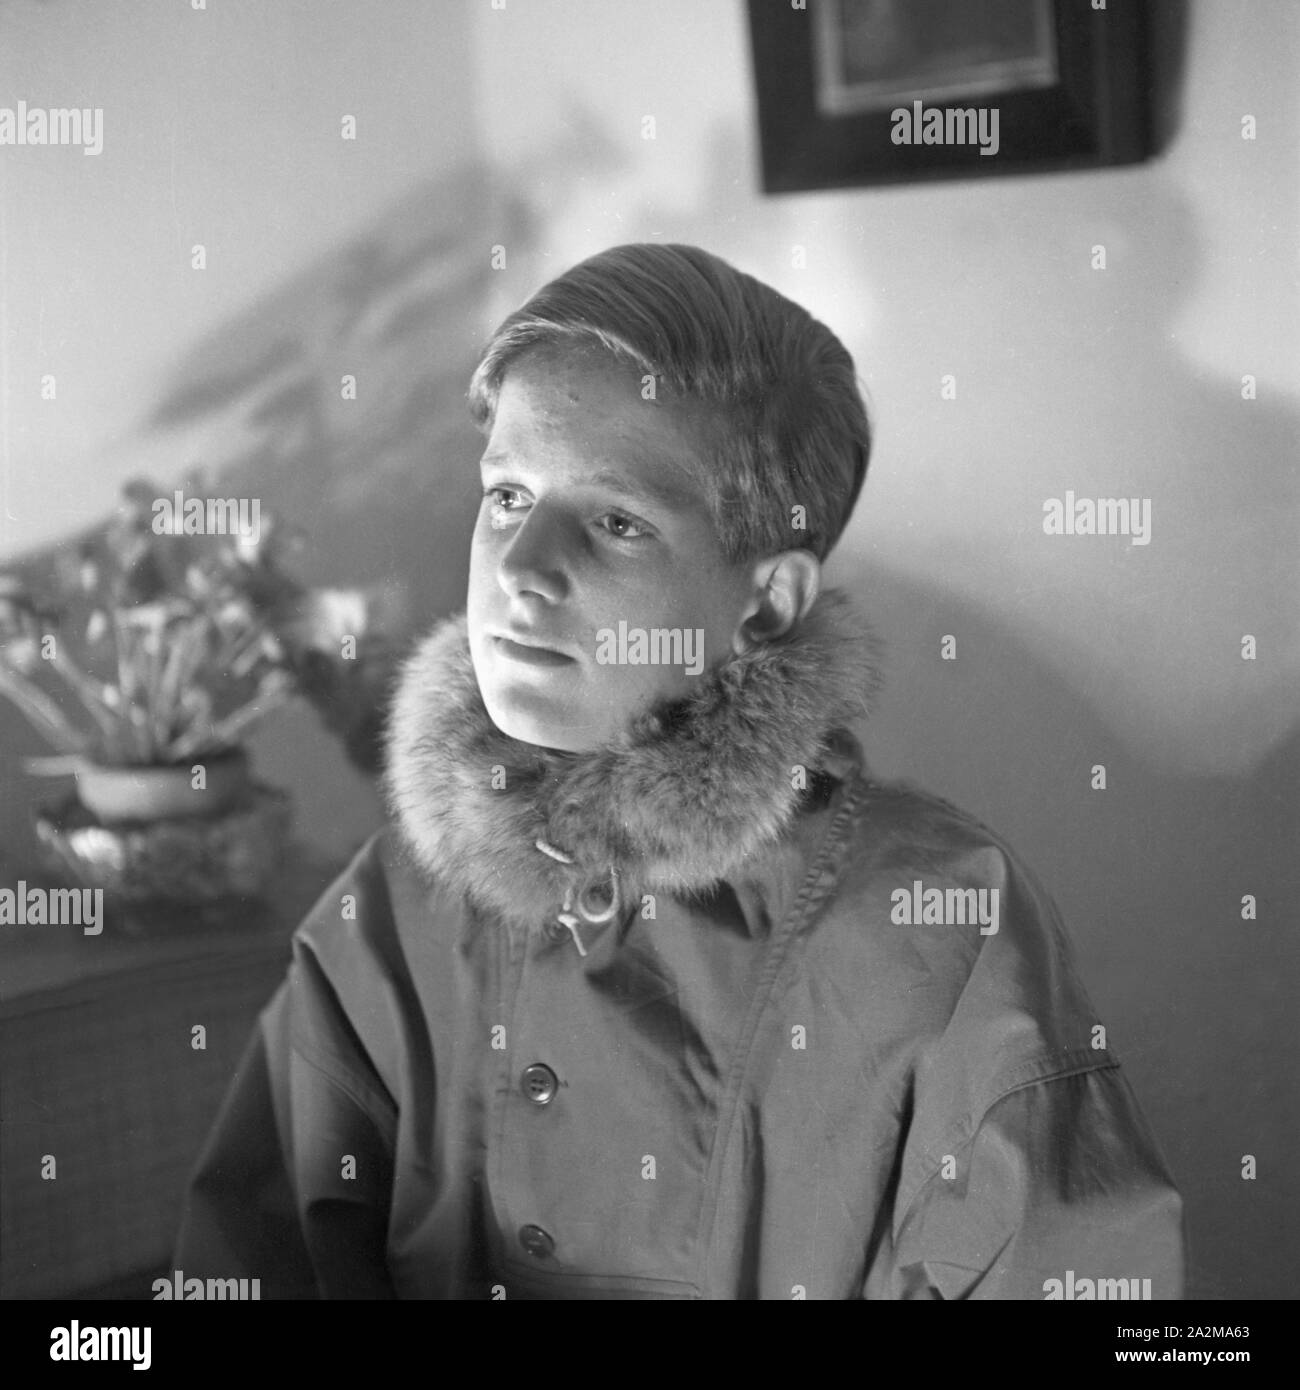 1940 boy Black and White Stock Photos & Images - Alamy